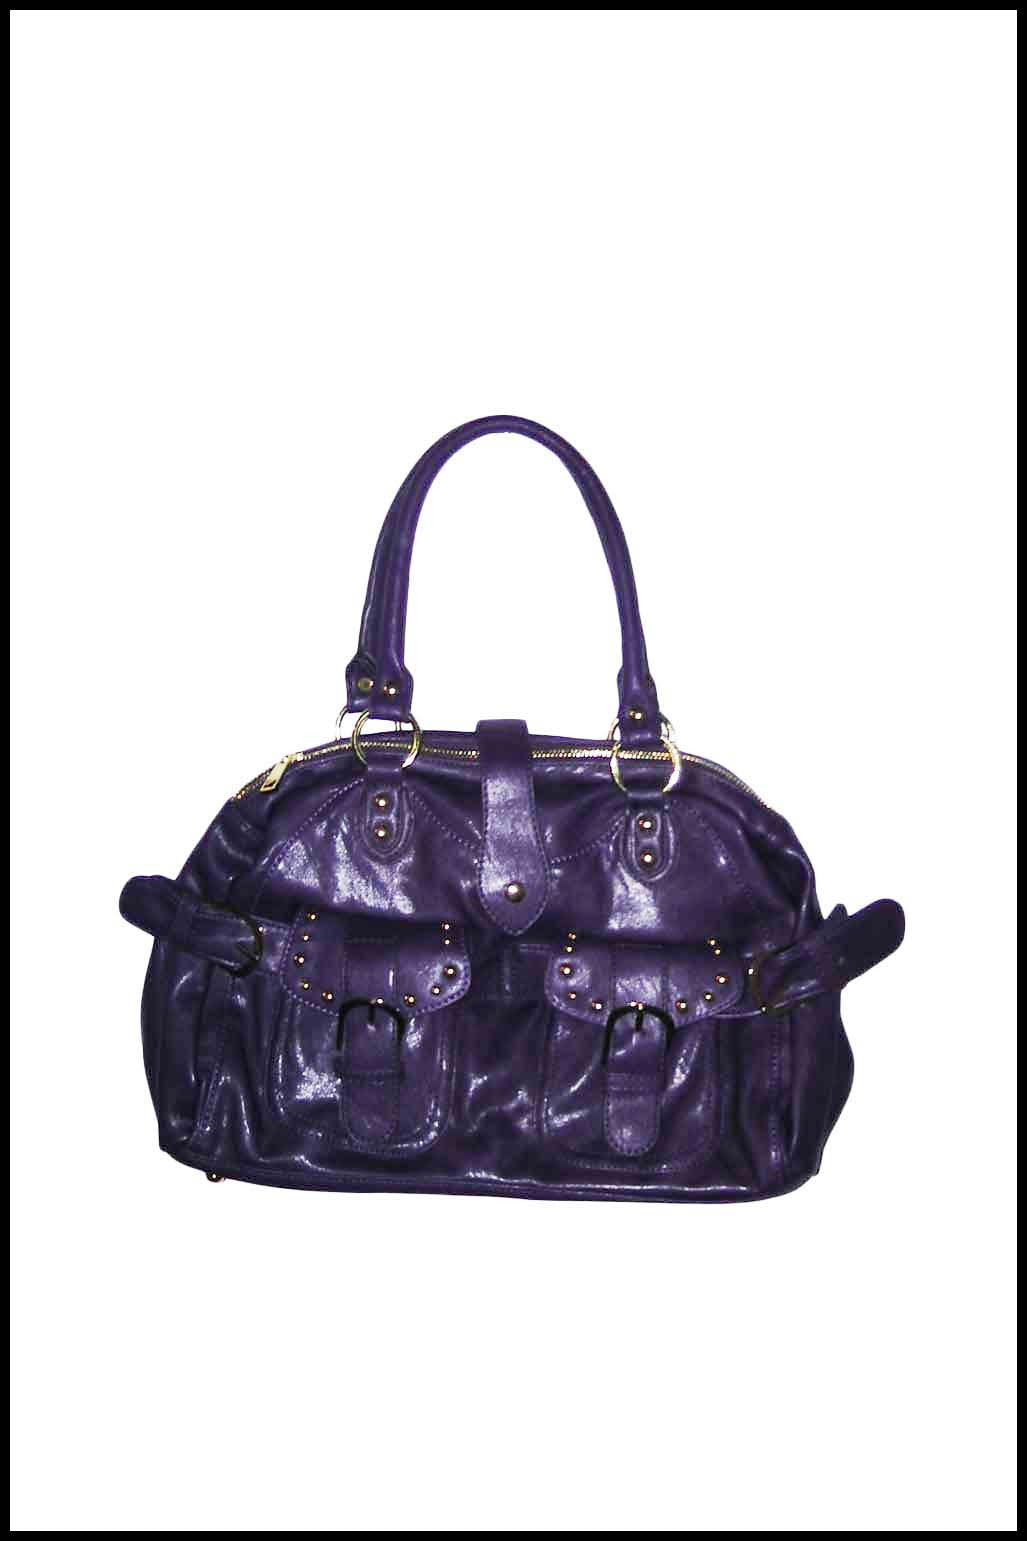 Buckled Handbag with Large Front Pockets and Stud Detailing